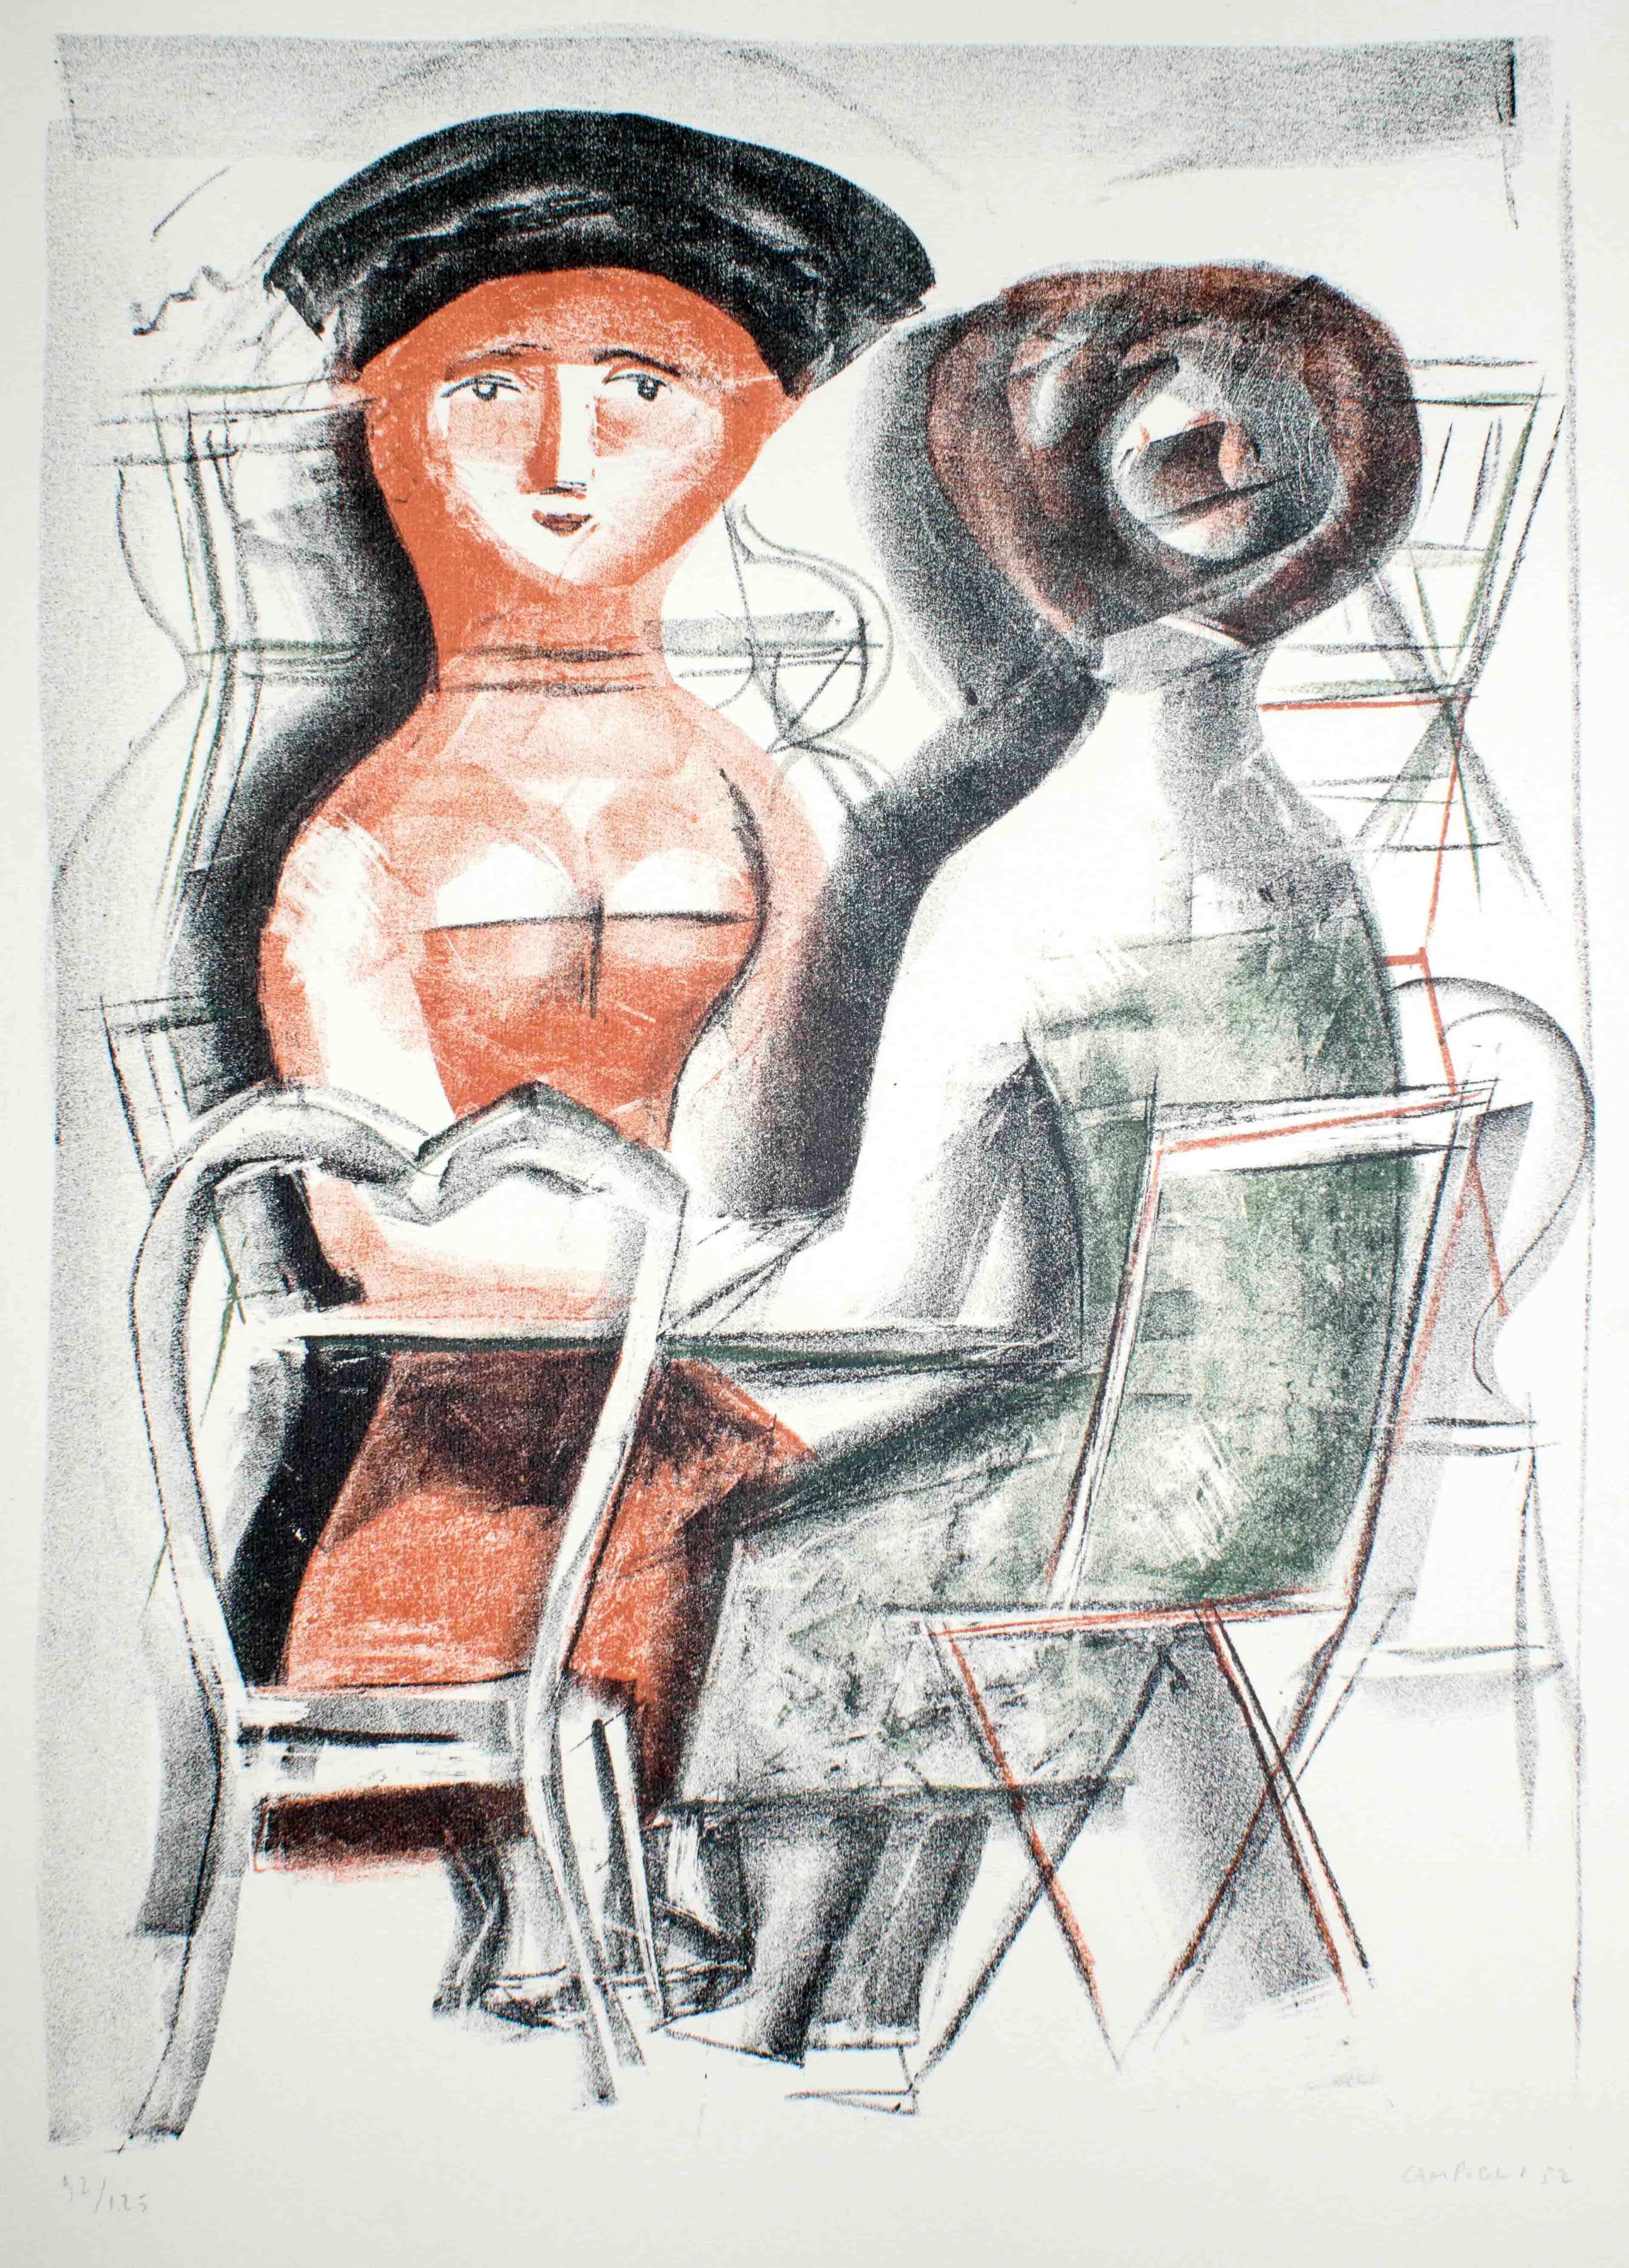 Hand signed and numbered. Edition of 125 prints.
In the lithograph “Donne al tavolino”, dated 1952, Massimo Campigli represents two women at a little table who are conversing. 

This artwork is shipped from Italy. Under existing legislation, any